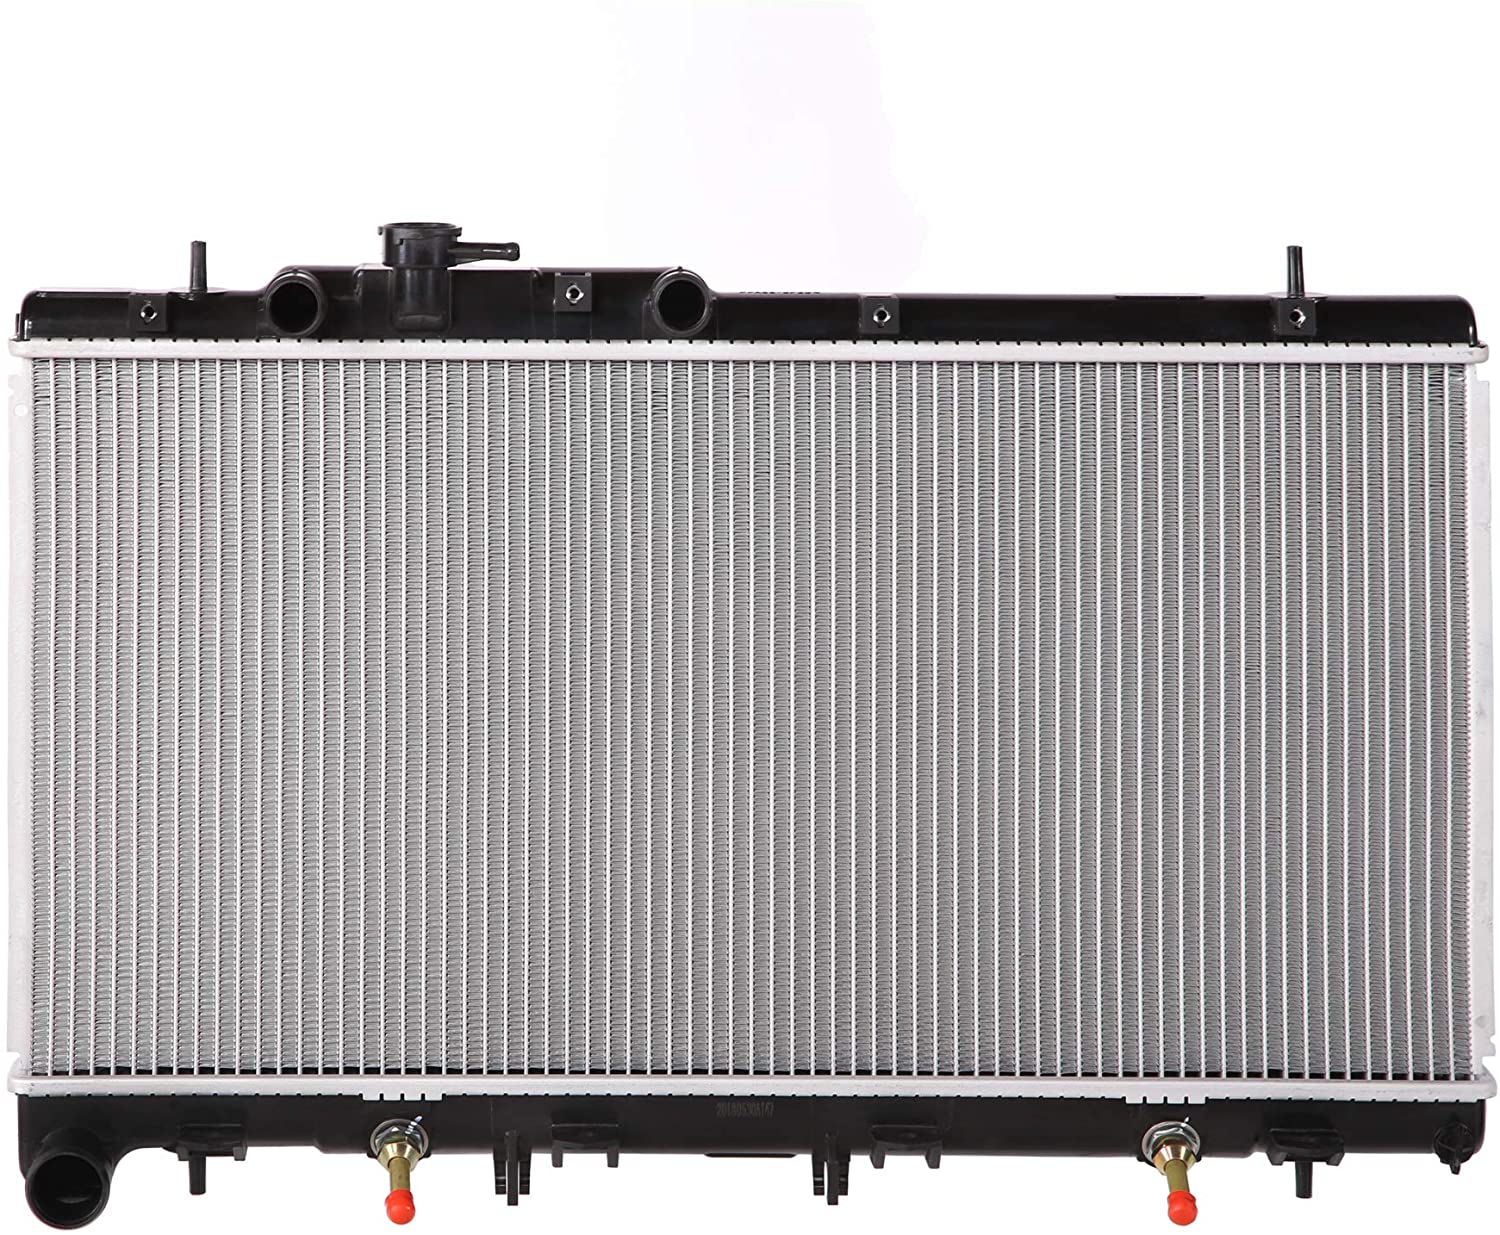 Lynol Cooling System Complete Aluminum Radiator Direct Replacement Compatible With 2001-2004 Subaru Outback H6 3.0L